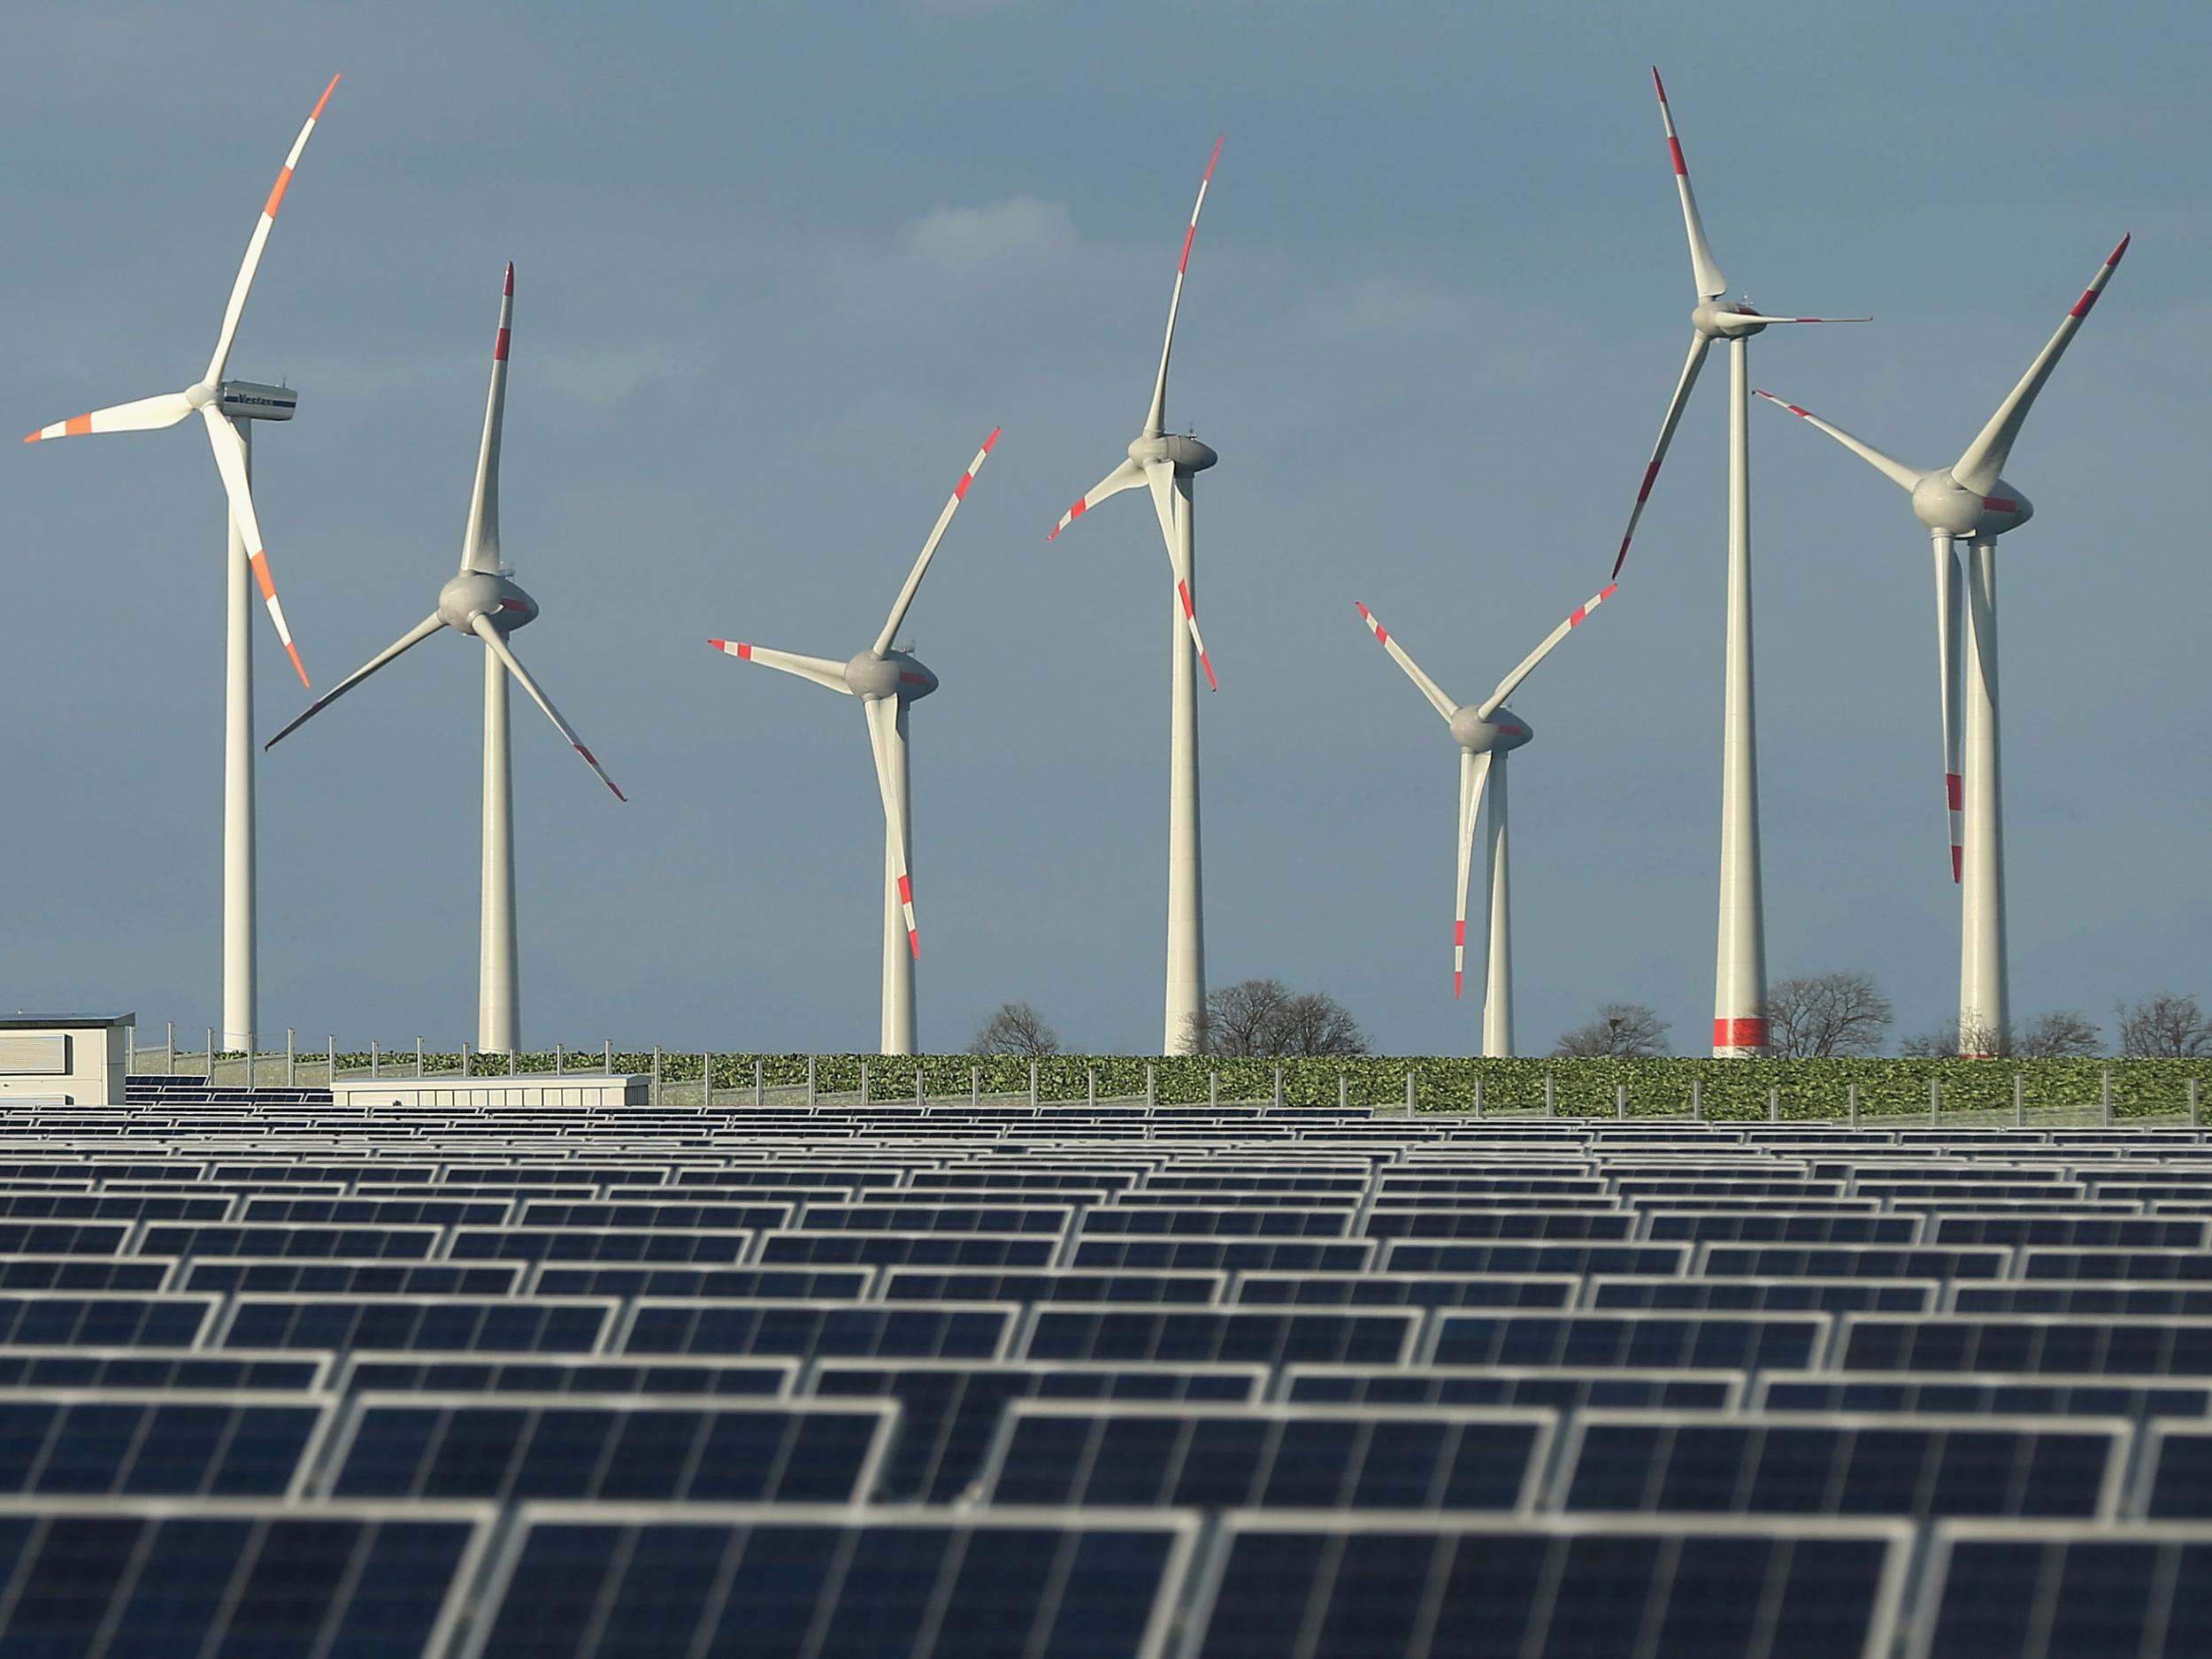 Five years ago renewables accounted for just 12 per cent of UK energy generation. Now it stands at 30 per cent